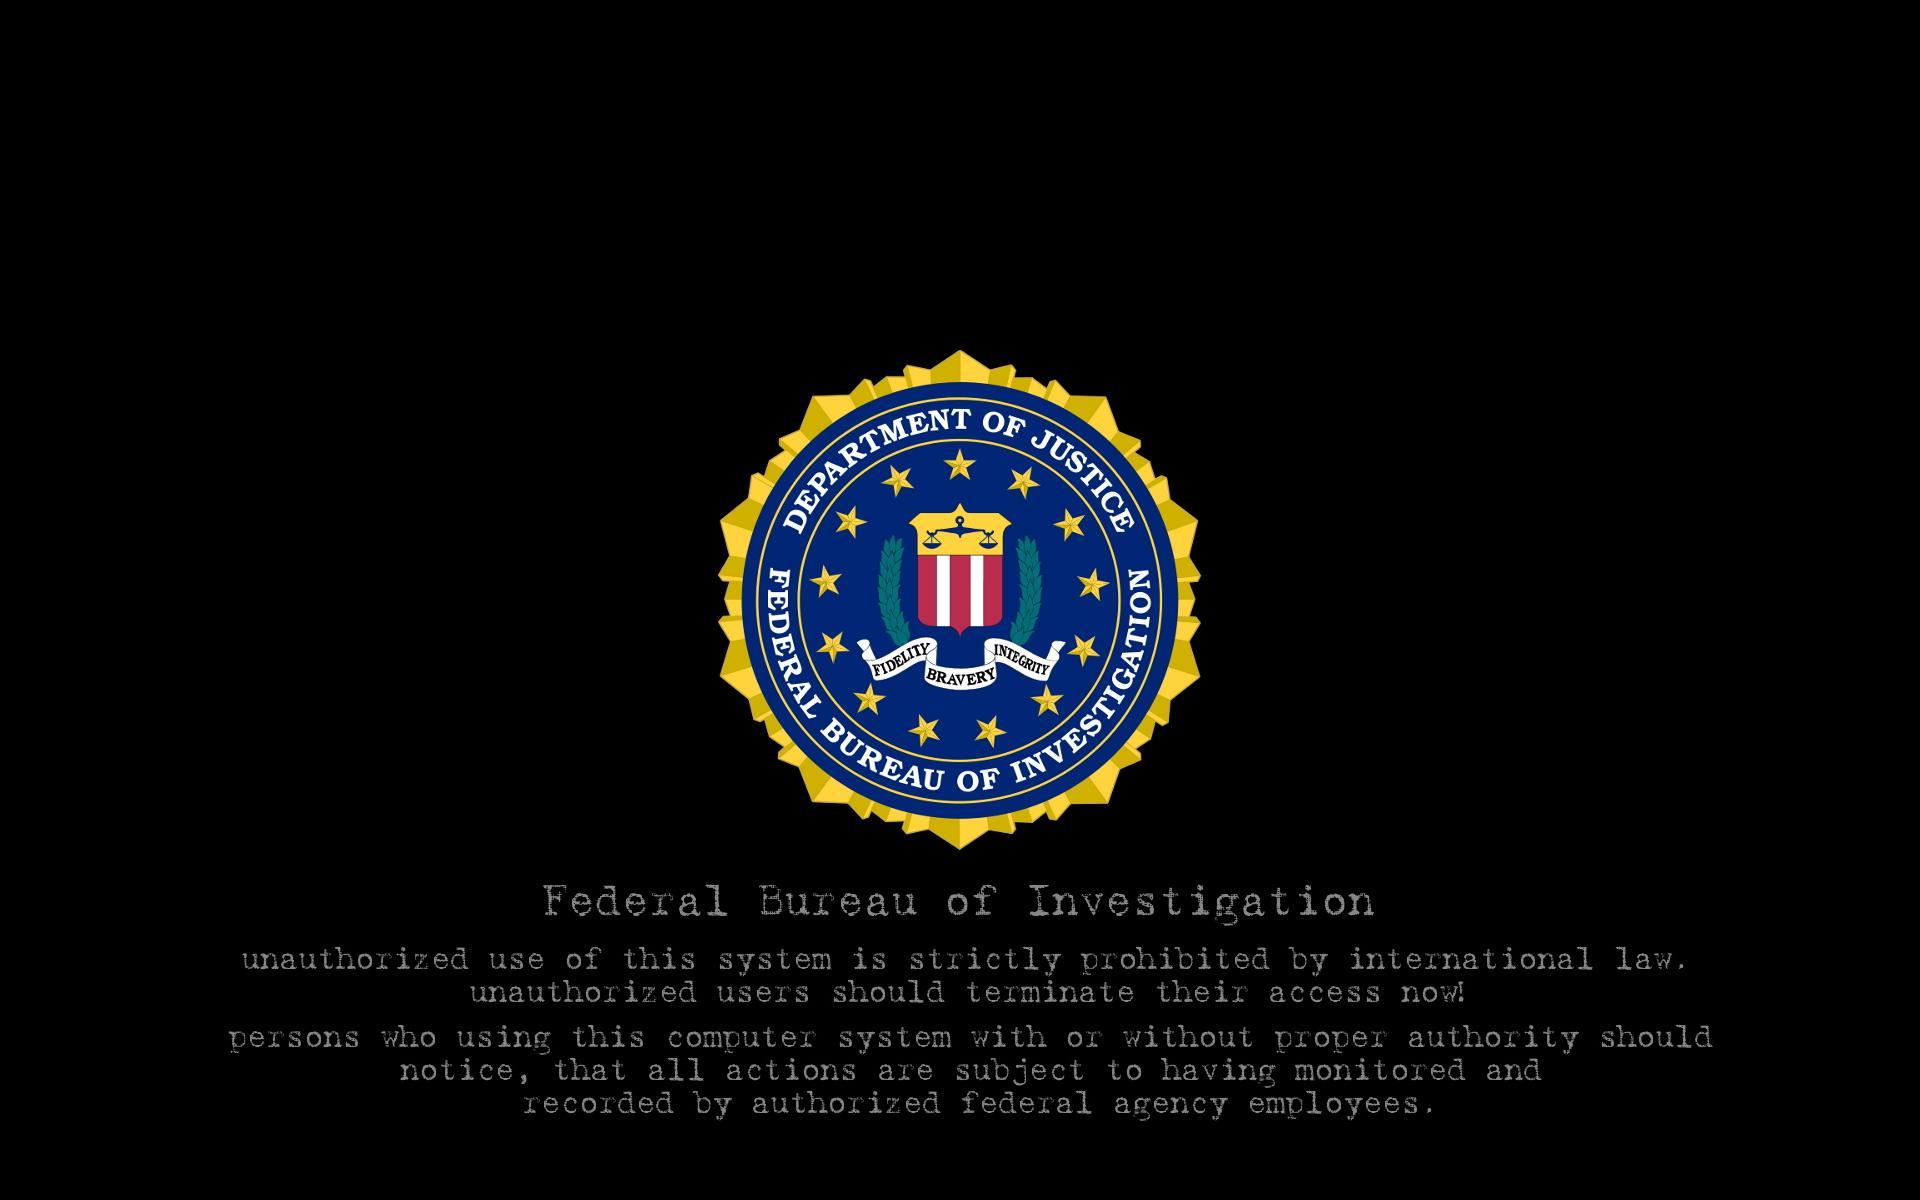 Nsa Wallpaper, image collections of wallpaper